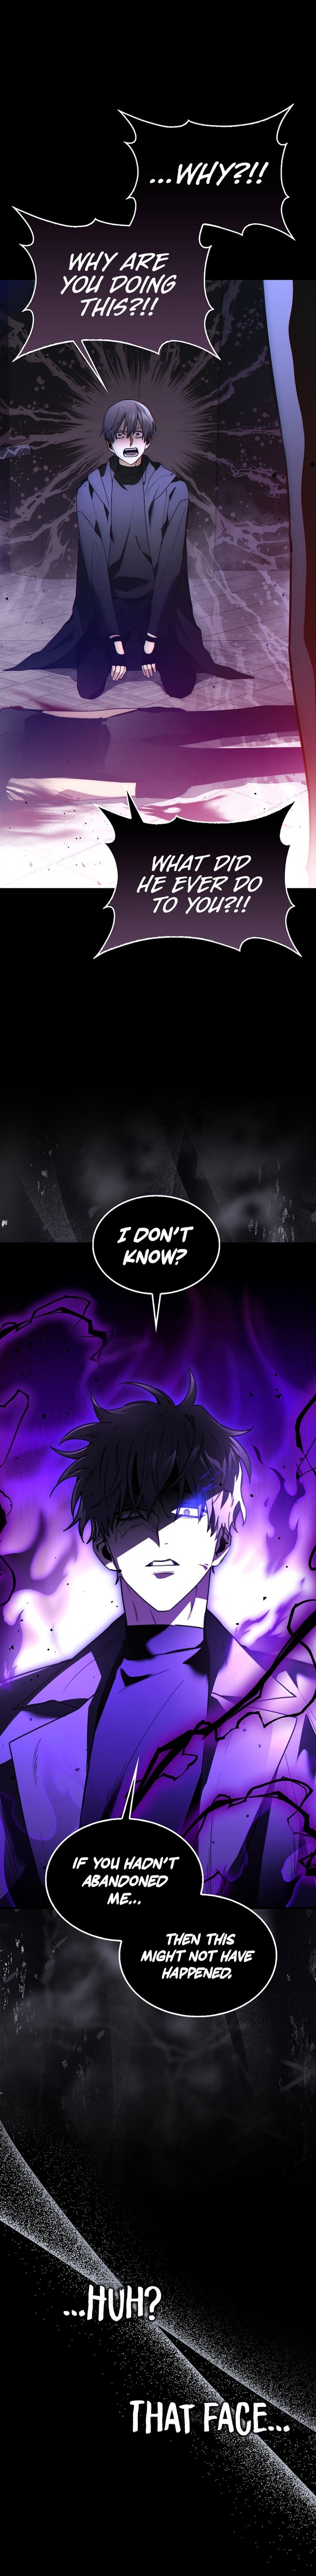 Im Not A Regressor Chapter 1 Page 25